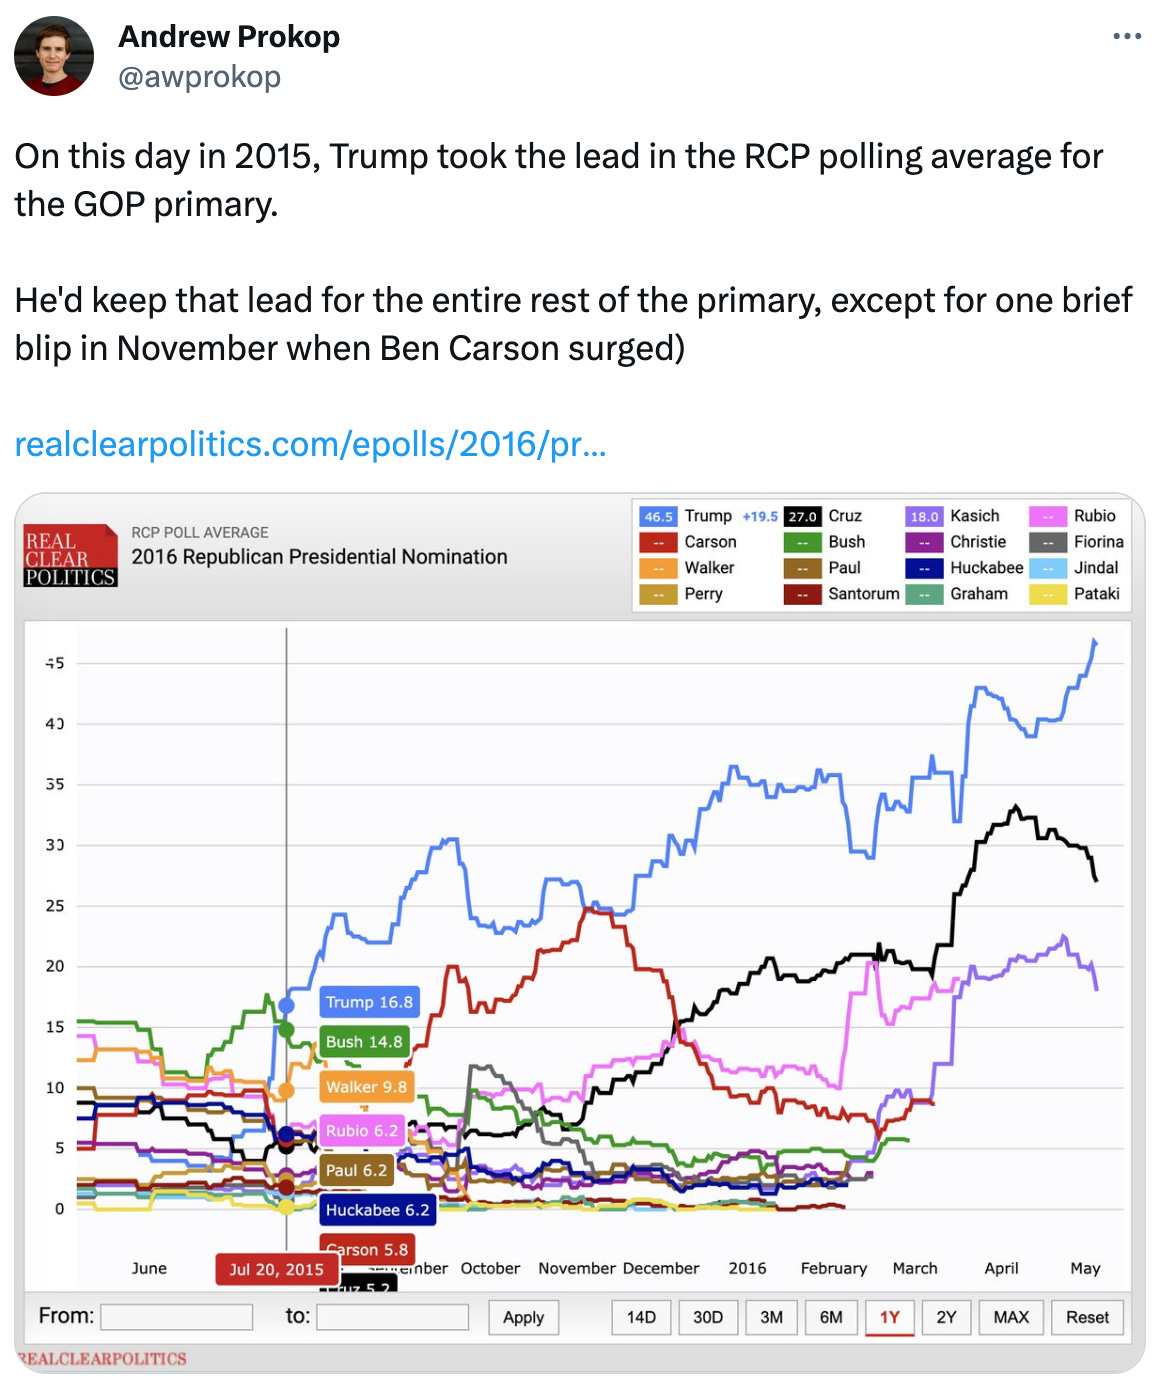  Andrew Prokop @awprokop On this day in 2015, Trump took the lead in the RCP polling average for the GOP primary.  He'd keep that lead for the entire rest of the primary, except for one brief blip in November when Ben Carson surged)  https://realclearpolitics.com/epolls/2016/president/us/2016_republican_presidential_nomination-3823.html